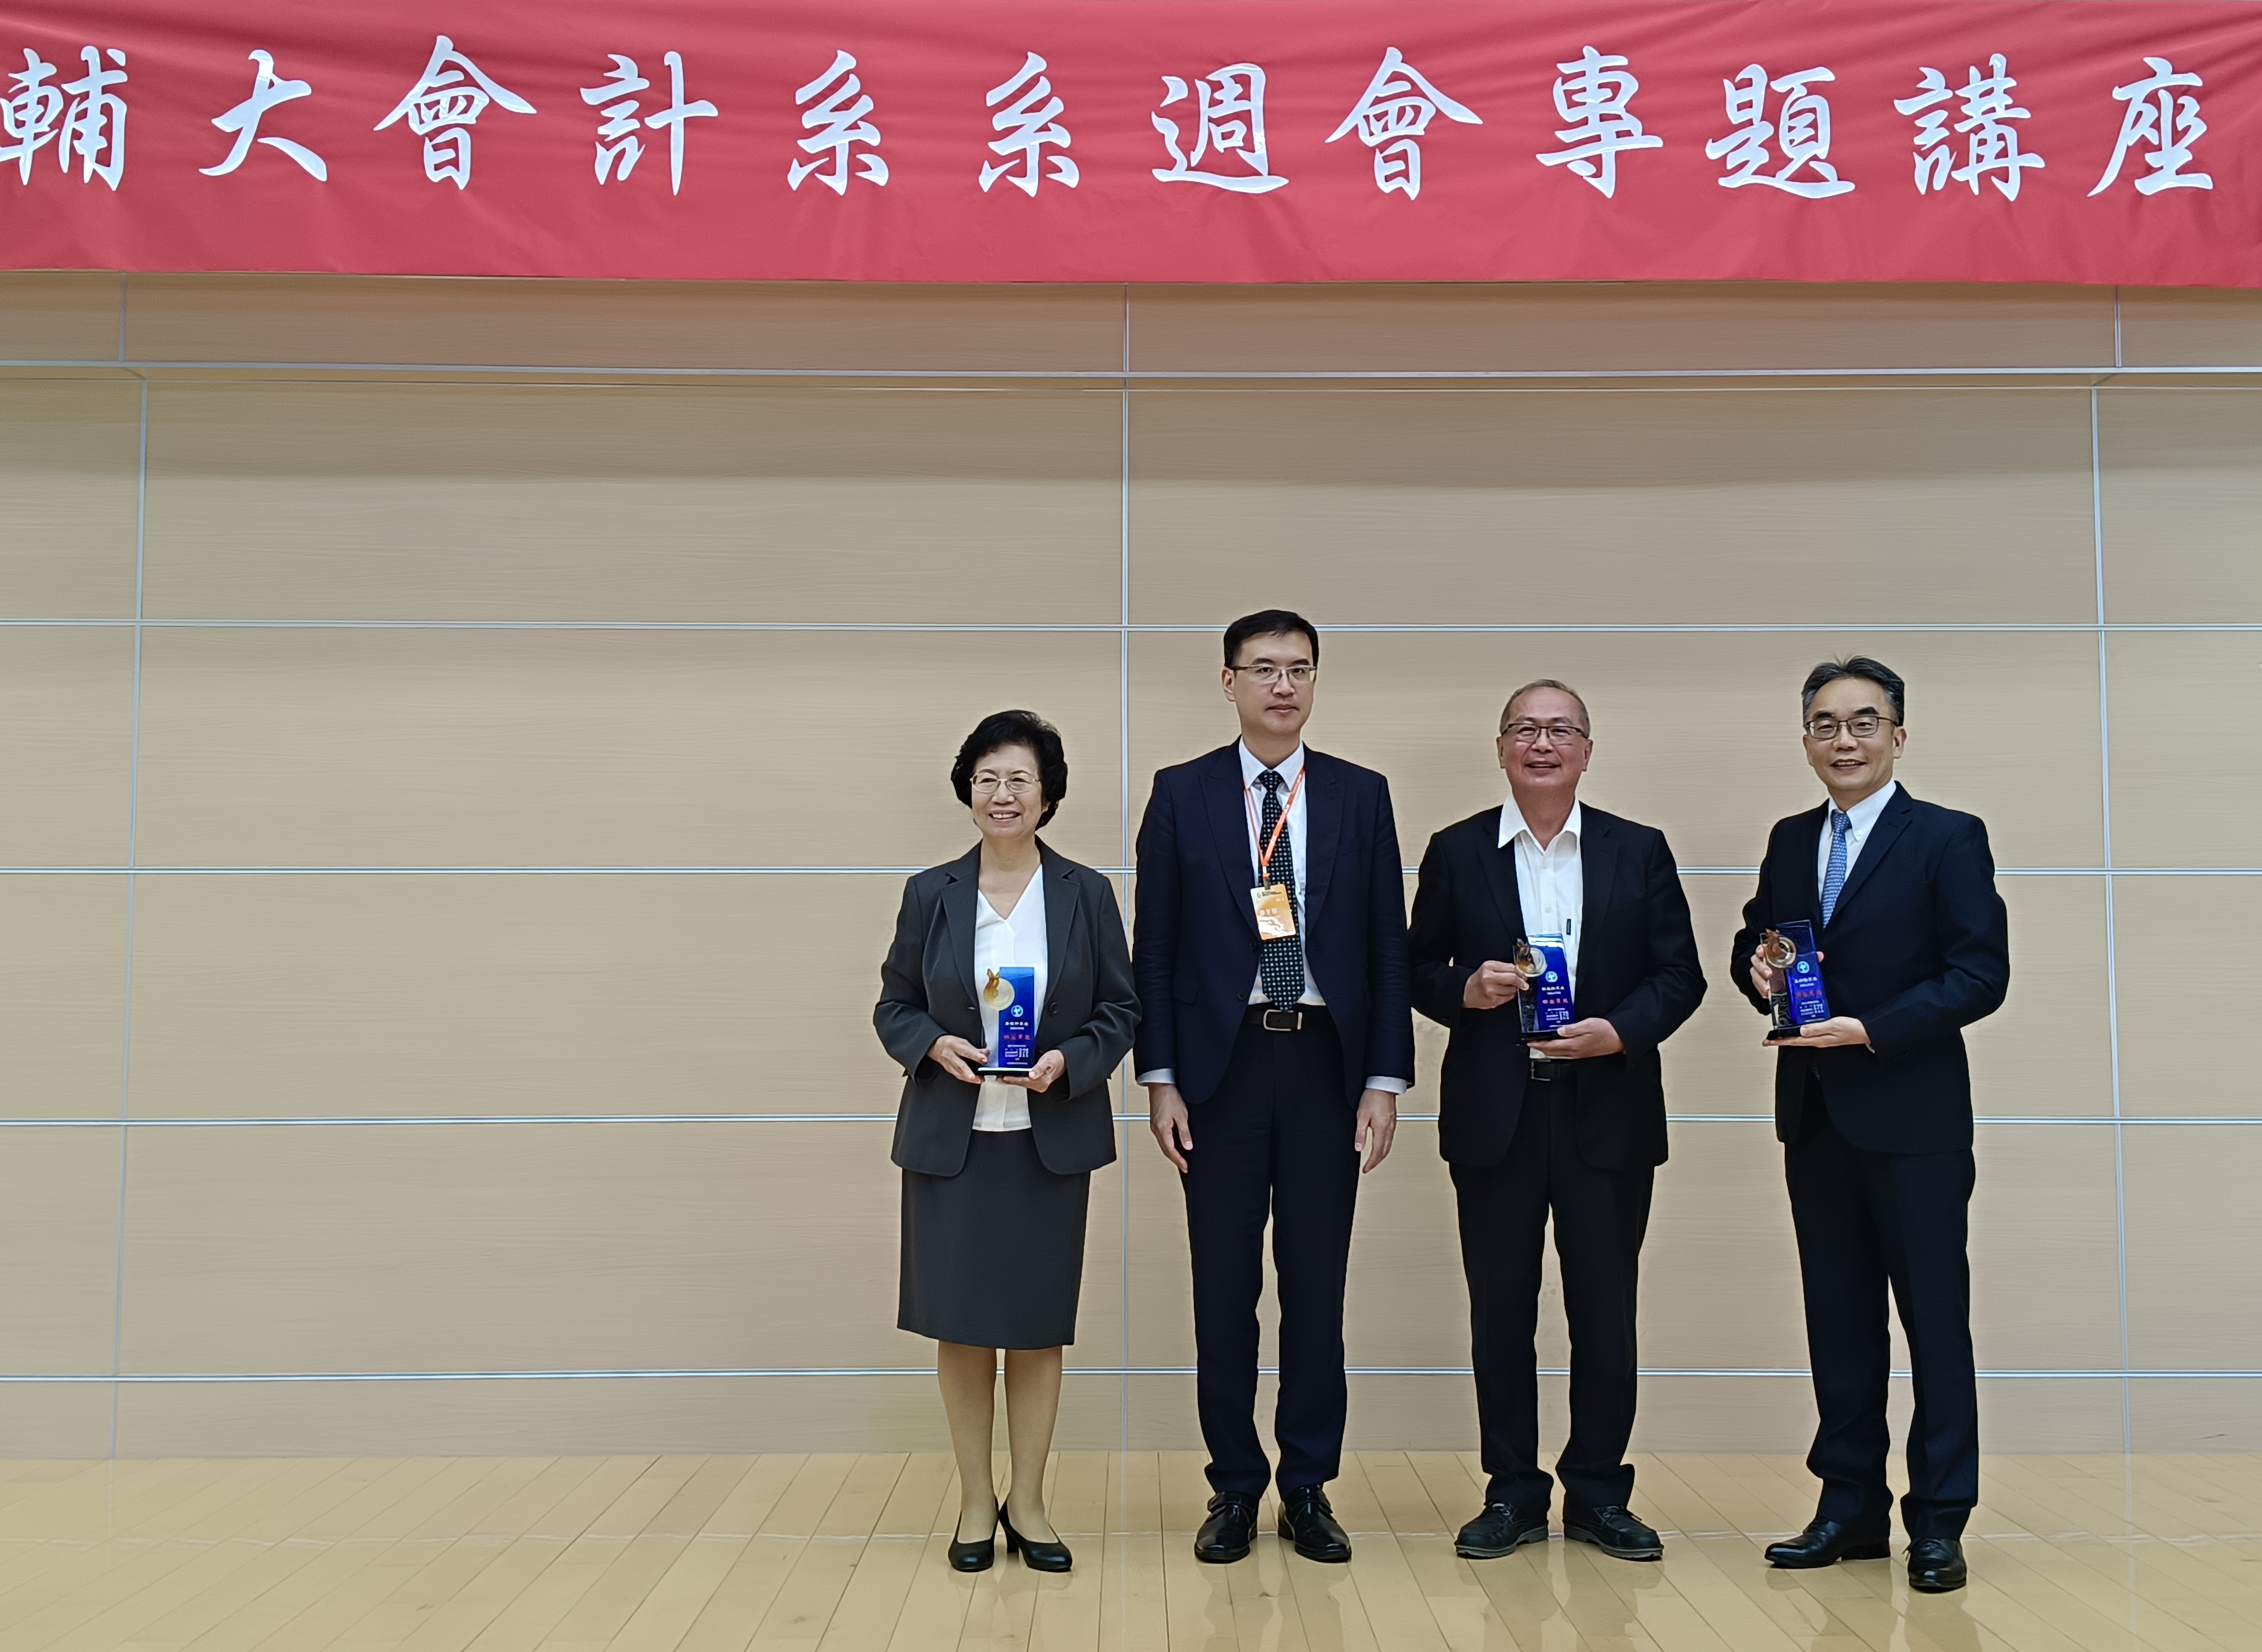 Department of Accounting distinguished alumni attend award ceremony